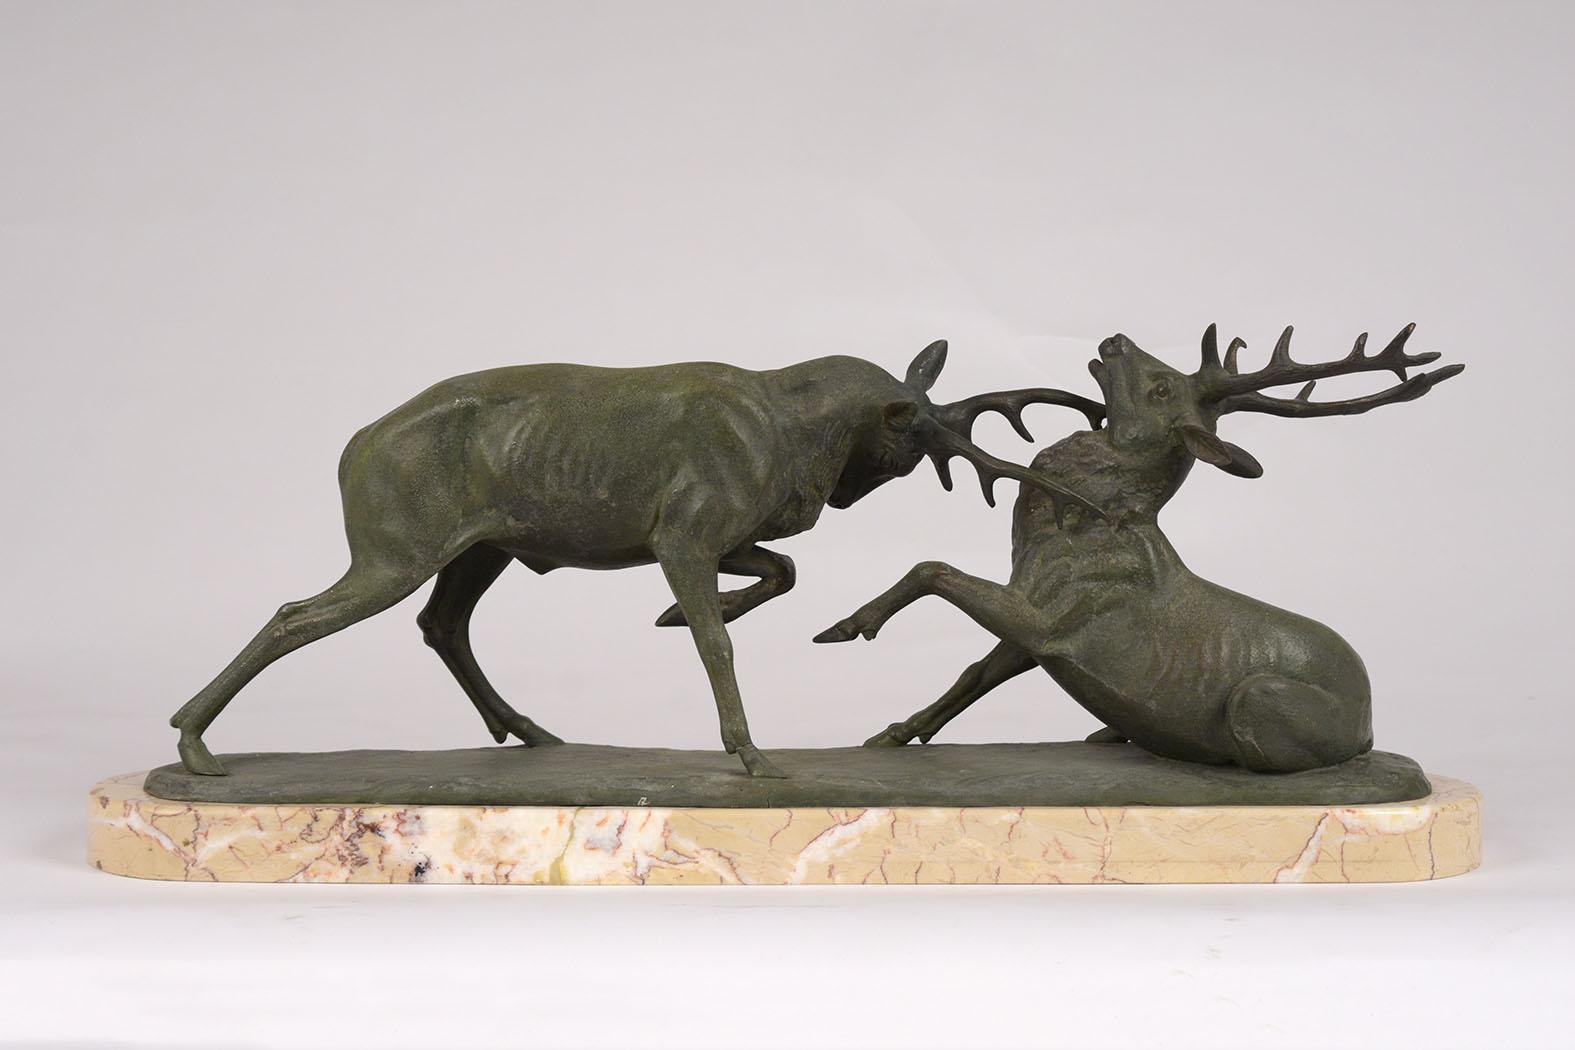 This antique French bronze statue depicting two fighting elk is in great condition with original patina this statute sits on its original oval marble base. This beautiful French sculpture is ready to be used for years to come.